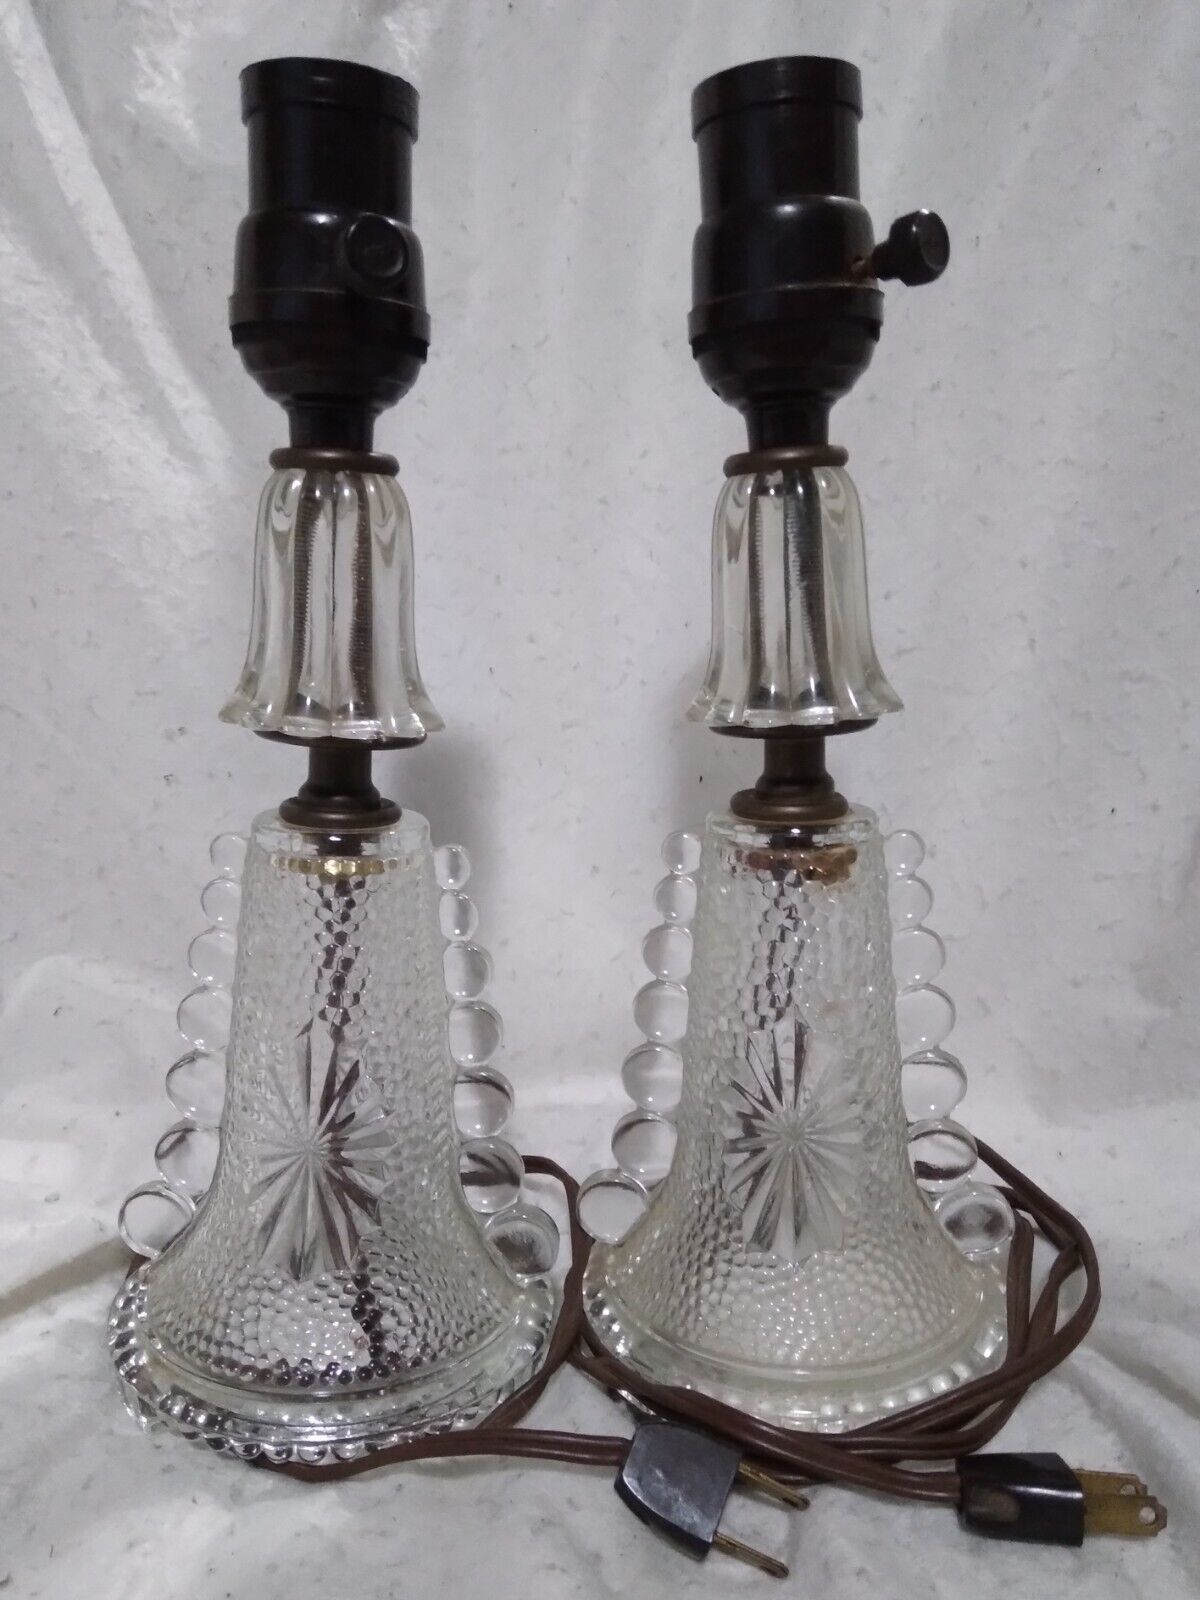 Vintage Pair Clear Hobnail Bubble Glass Bedroom Table Lamps Art Deco -Tested-